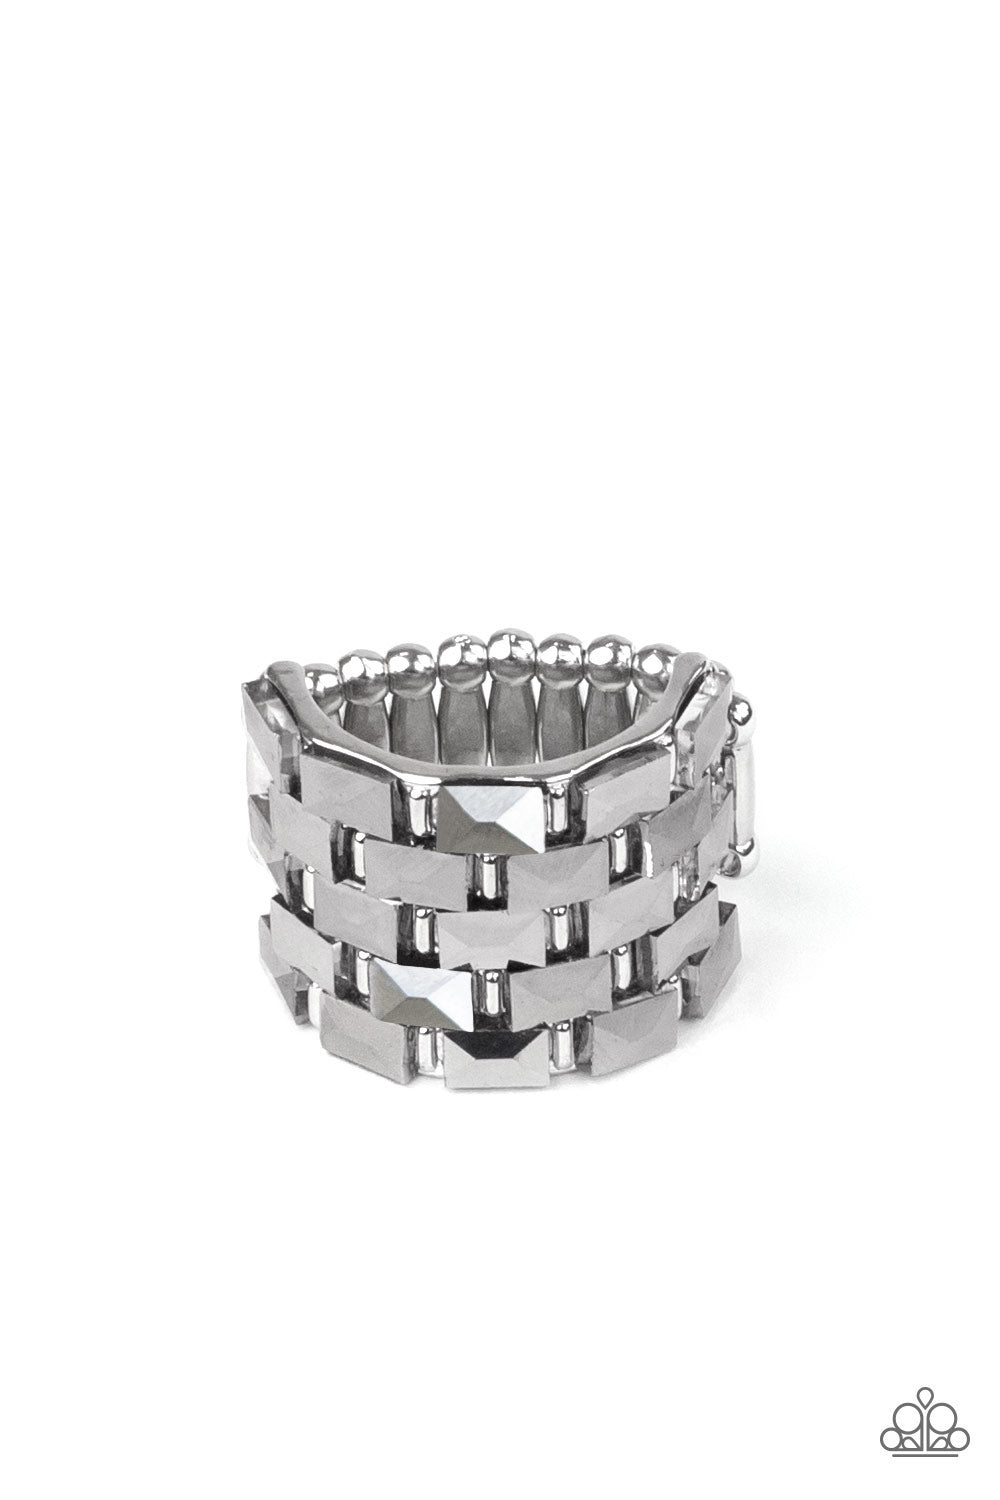 Checkered Couture Silver Ring - Paparazzi Accessories Featuring a flashy faceted surface, staggered rows of rectangular hematite rhinestones alternate with shiny silver bar-like accents across a thick silver band for a gritty-glamorous statement atop the finger. Features a stretchy band for a flexible fit.  All Paparazzi Accessories are lead free and nickel free!  Sold as one individual ring.